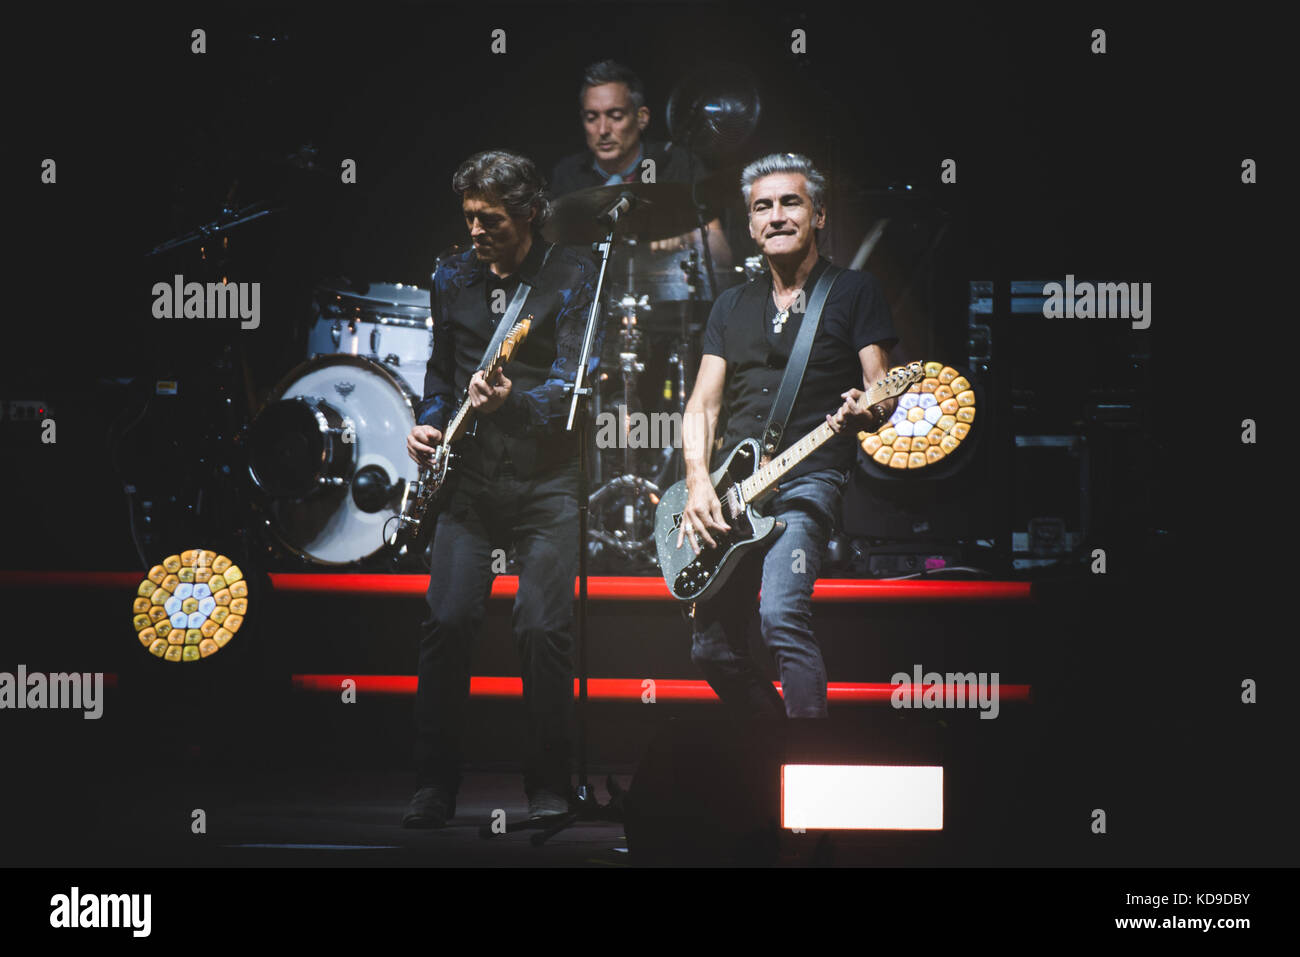 Turin, Italy. 10th Oct, 2017. The Italian singer and song writer Luciano Ligabue performing live on stage at the Pala Alpitour in Torino for his "Made in Italy" tour 2017. Credit: Alessandro Bosio/Pacific Press/Alamy Live News Stock Photo